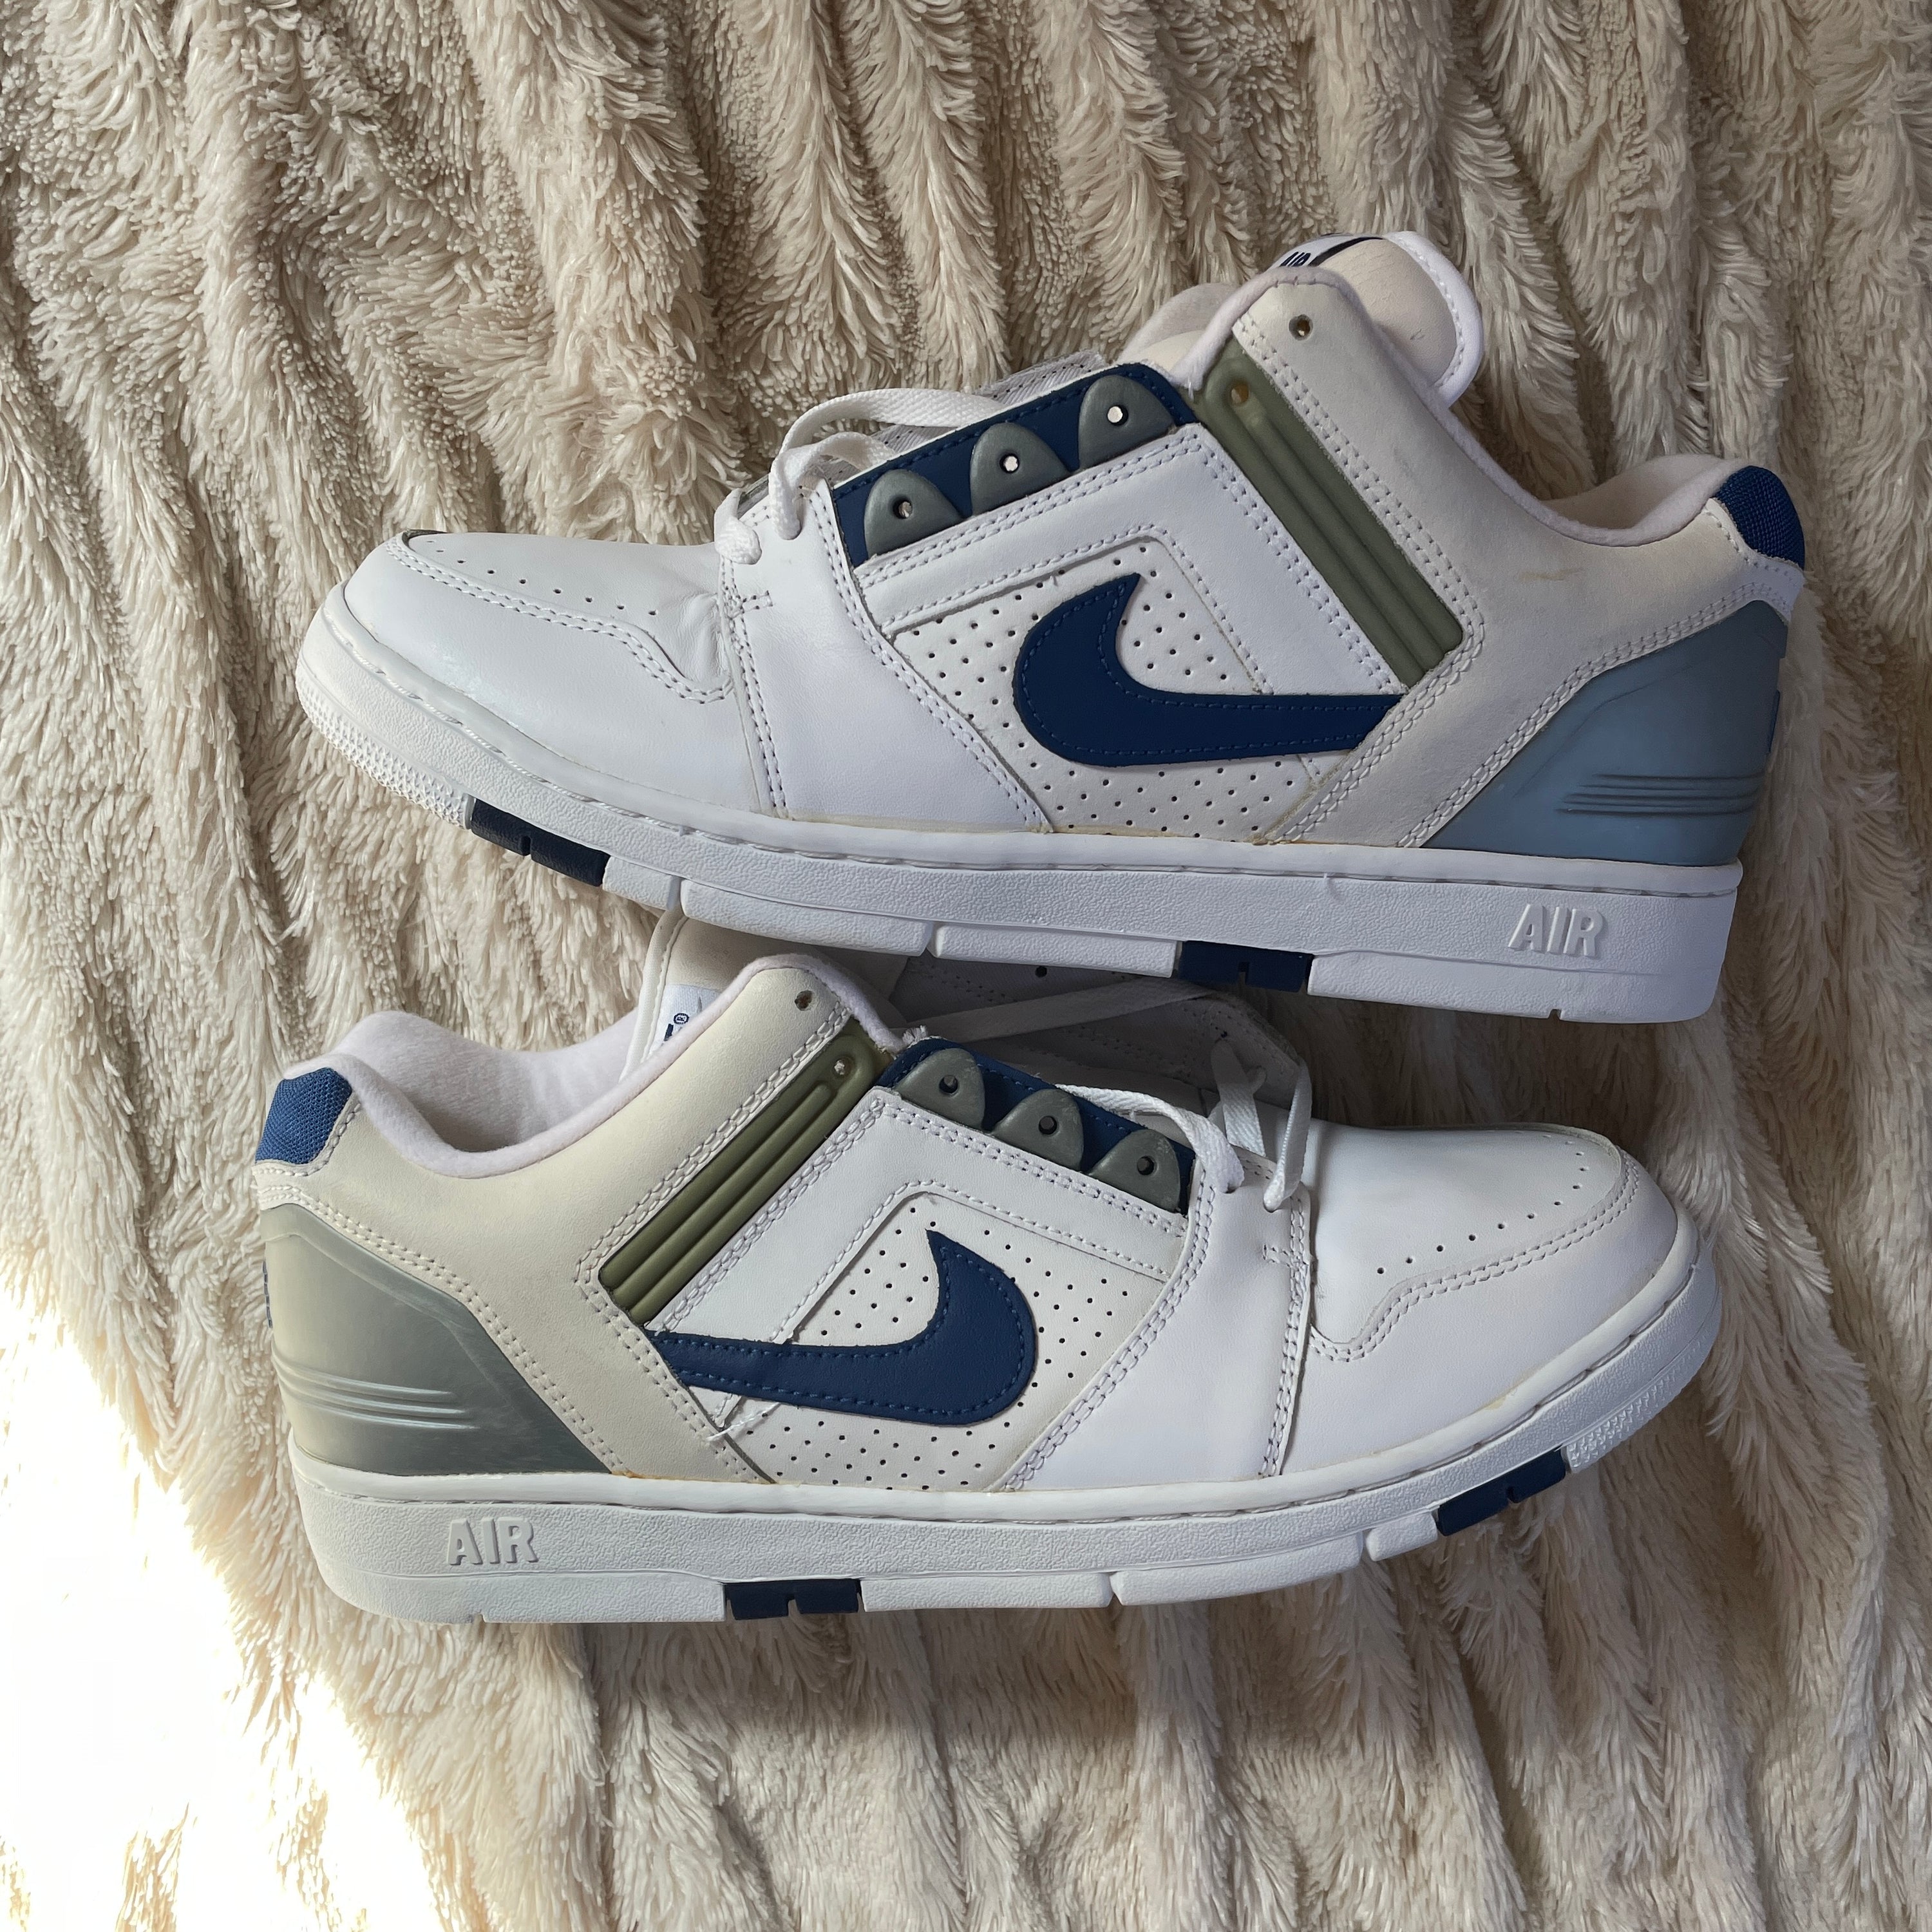 US 13 - NIKE AIR FORCE 2 LOW "WHITE BLUE SILVER" [2003]